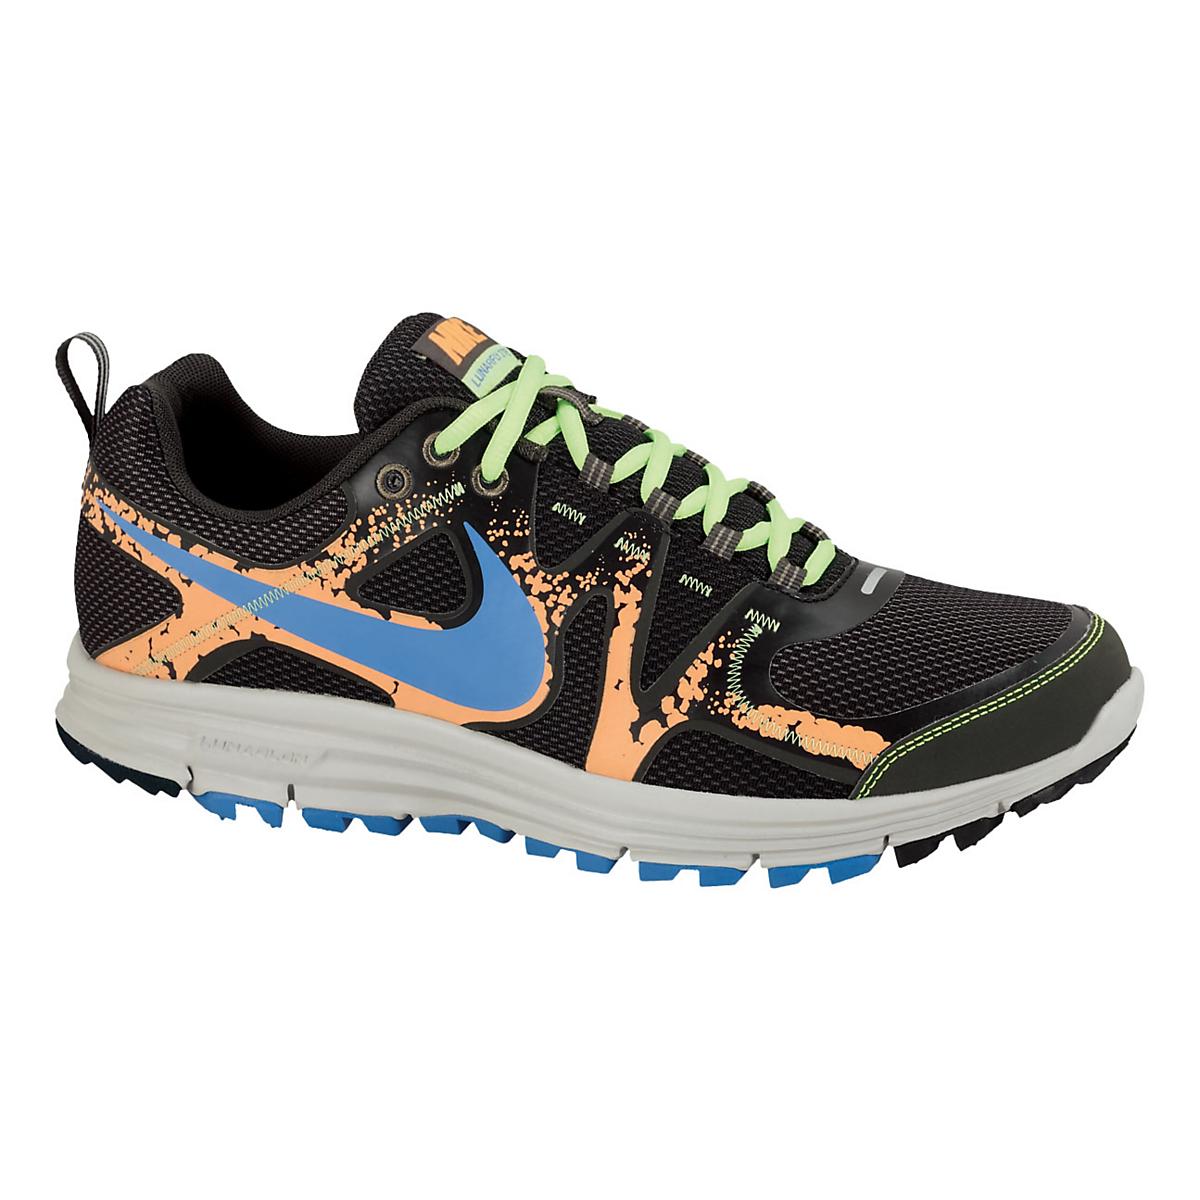 Mens Nike Lunarfly+ 3 Trail Trail Running Shoe at Road Runner Sports